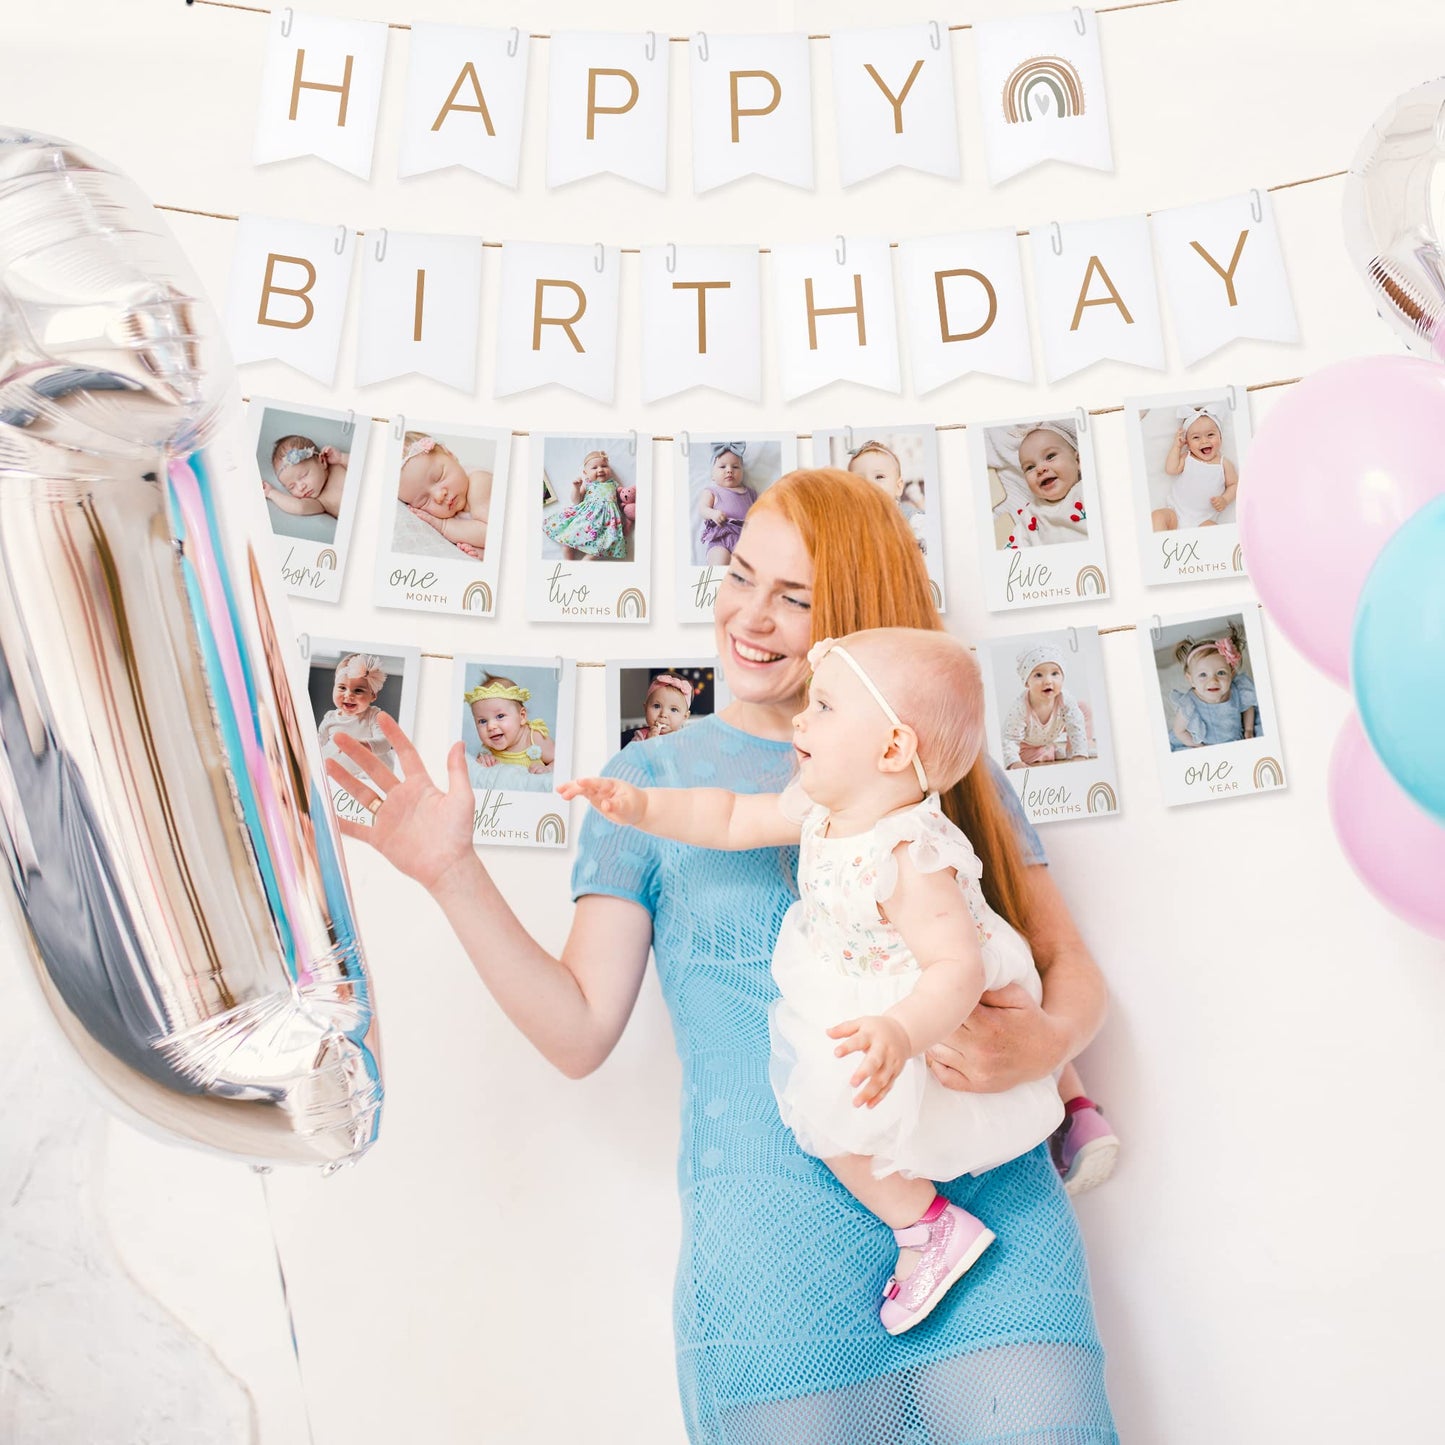 Beautiful 1st Birthday Photo Banner Set From Newborn to 12 Months - The Perfect Party Decoration for Your Baby Girls First Birthday Party - 13 Reversible Milestone Cards From Newborn to 13 Years